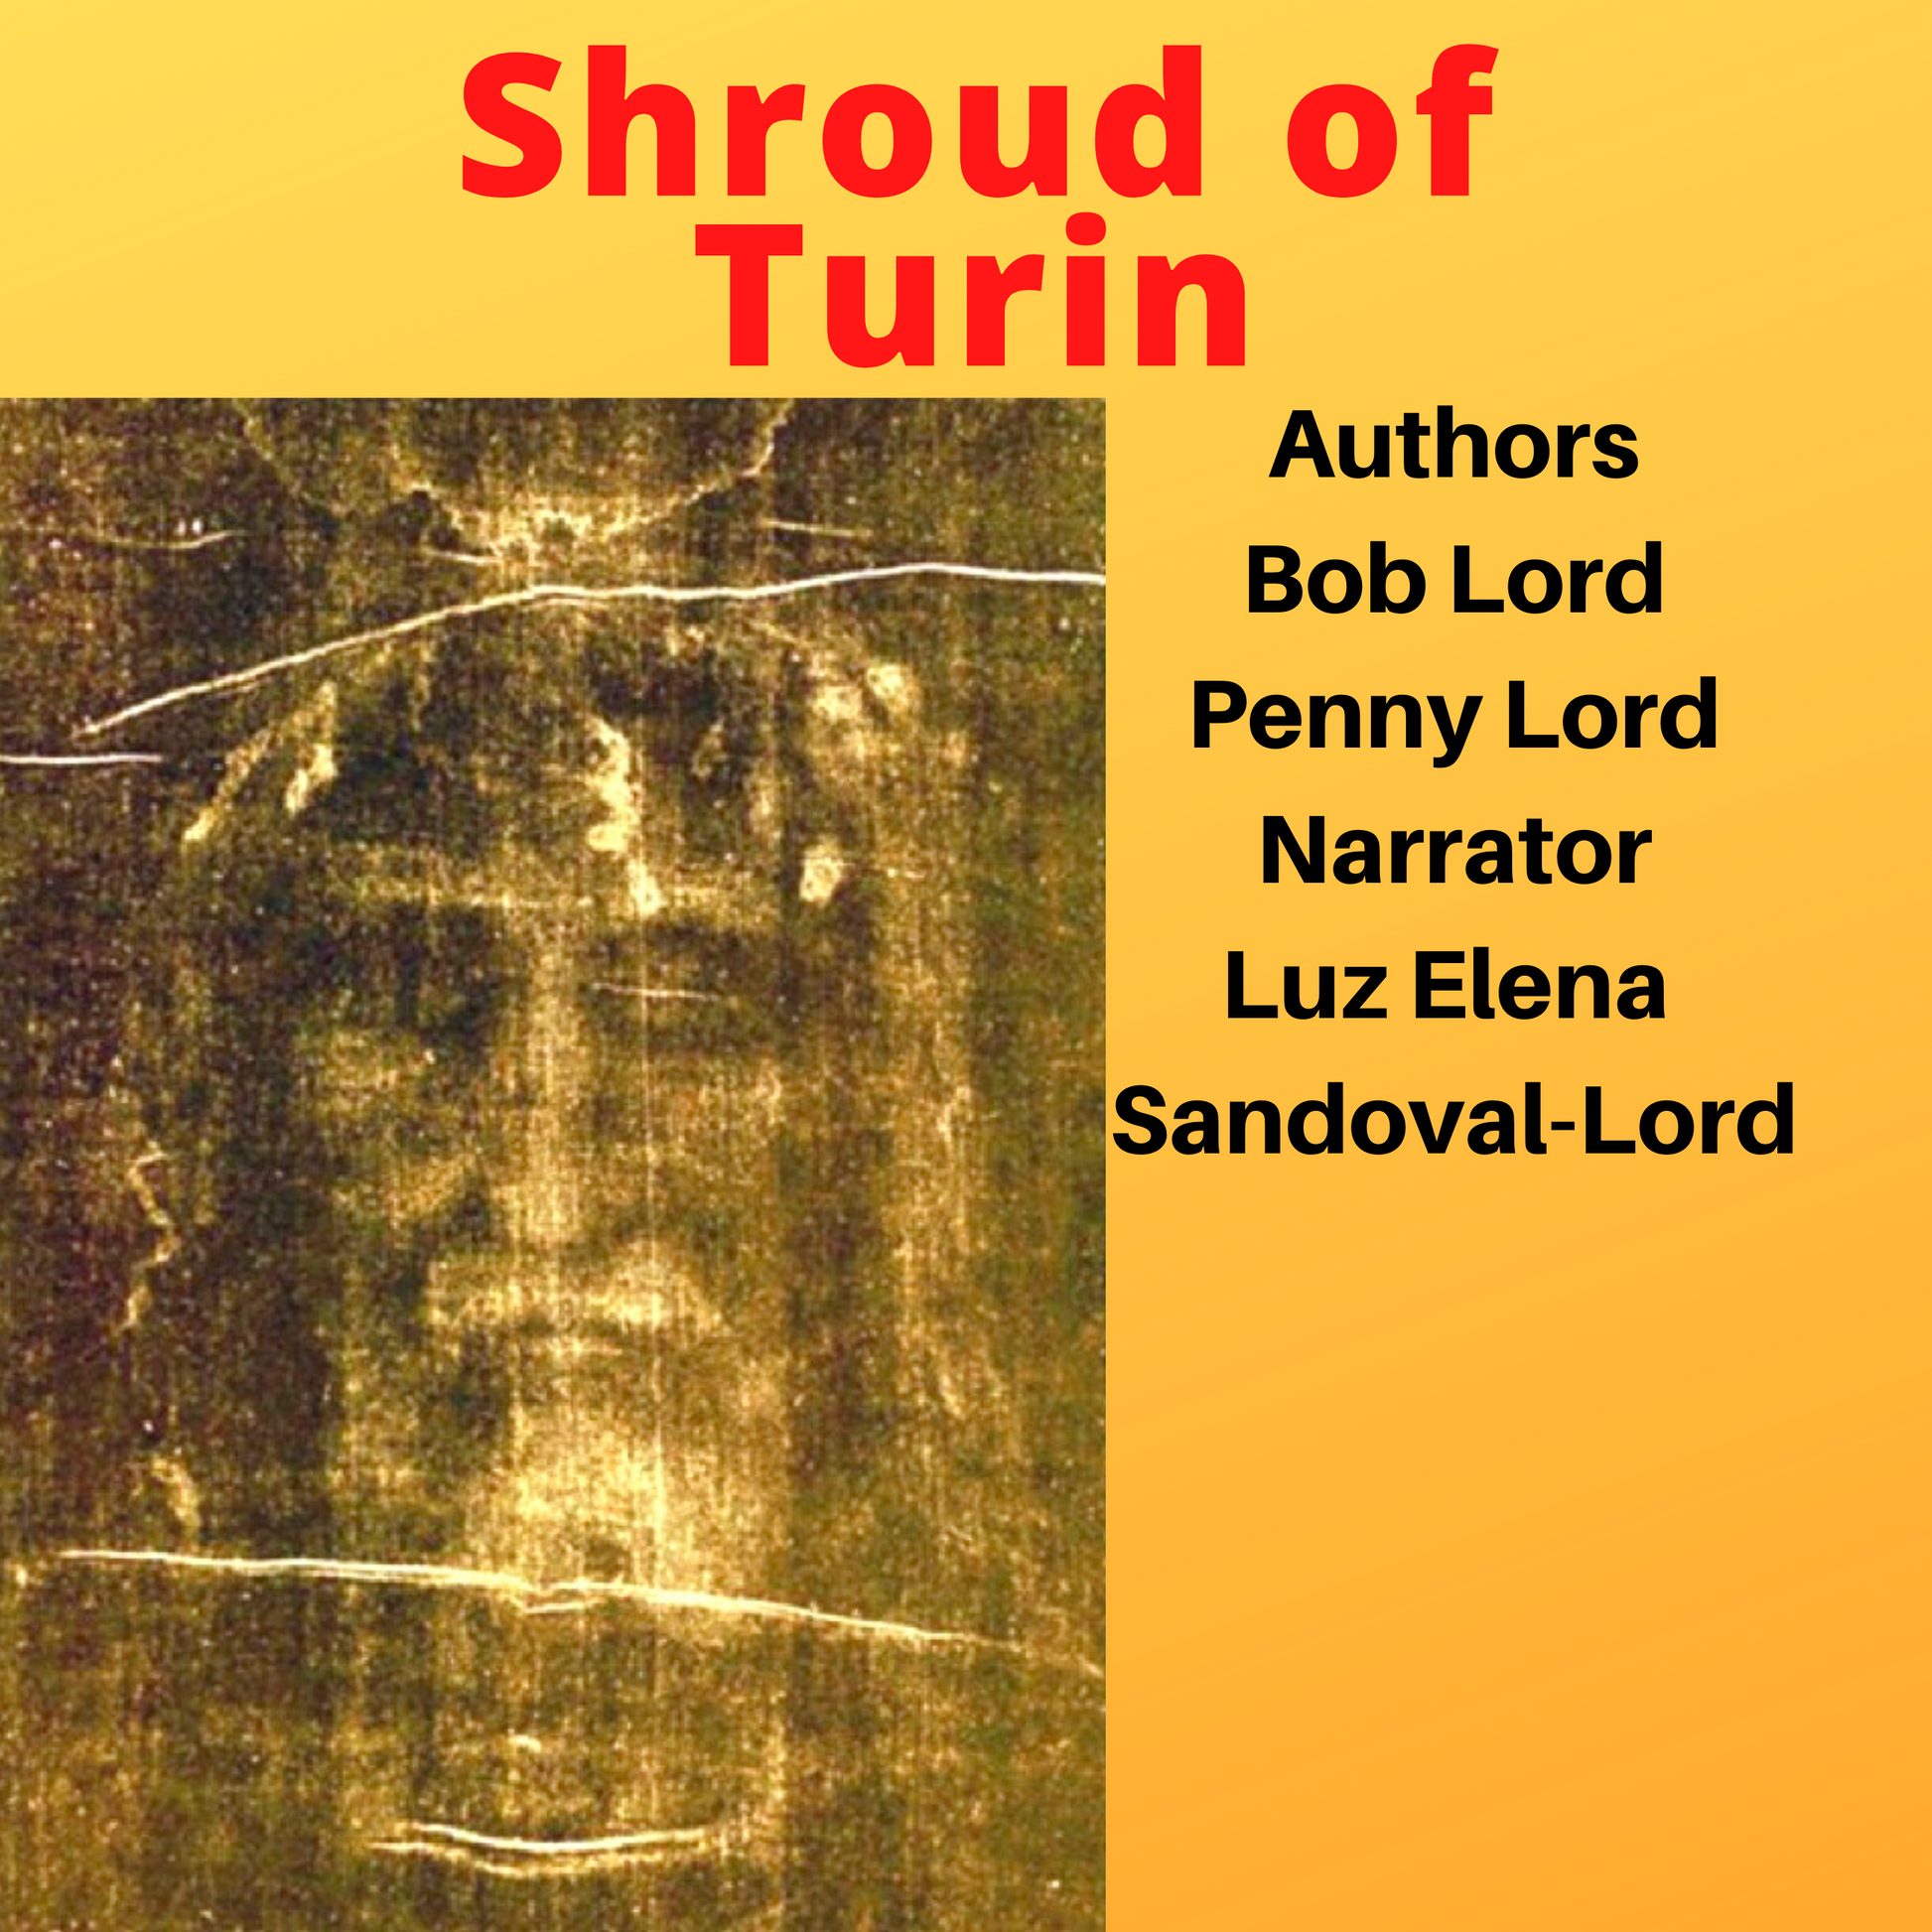 Shroud of Turin Audiobook - Bob and Penny Lord